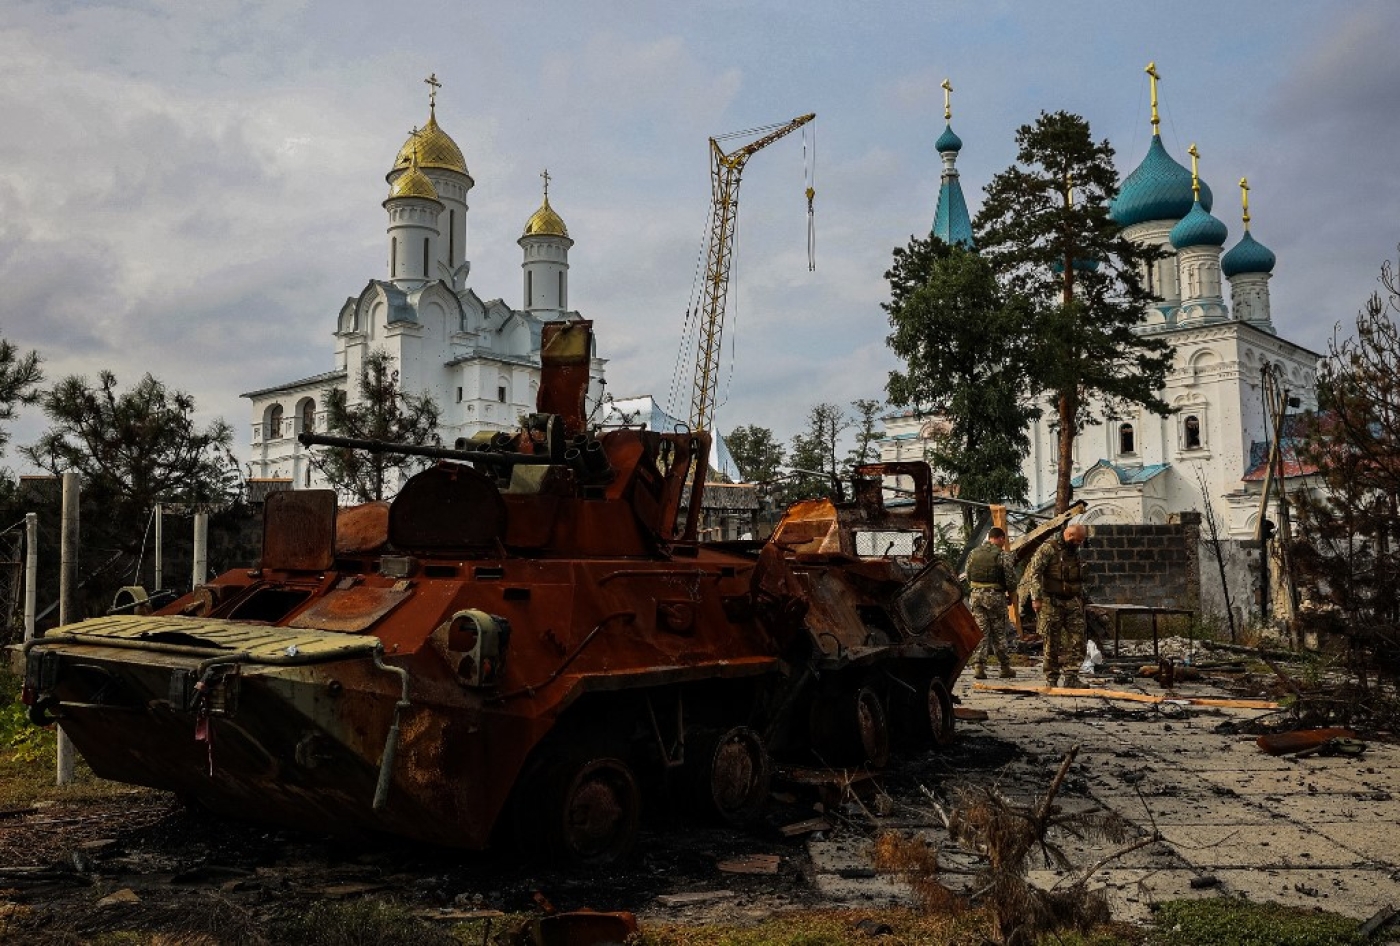 Photograph taken on 30 September 2022 shows Ukrainian servicemen walking next to a destroyed Russian Army APC in a yard of Burial Shroud of the Mother of God Orthodox Church on the bank of the Seversky Donets River near the town of Sviatohirsk, Donetsk region (AFP)